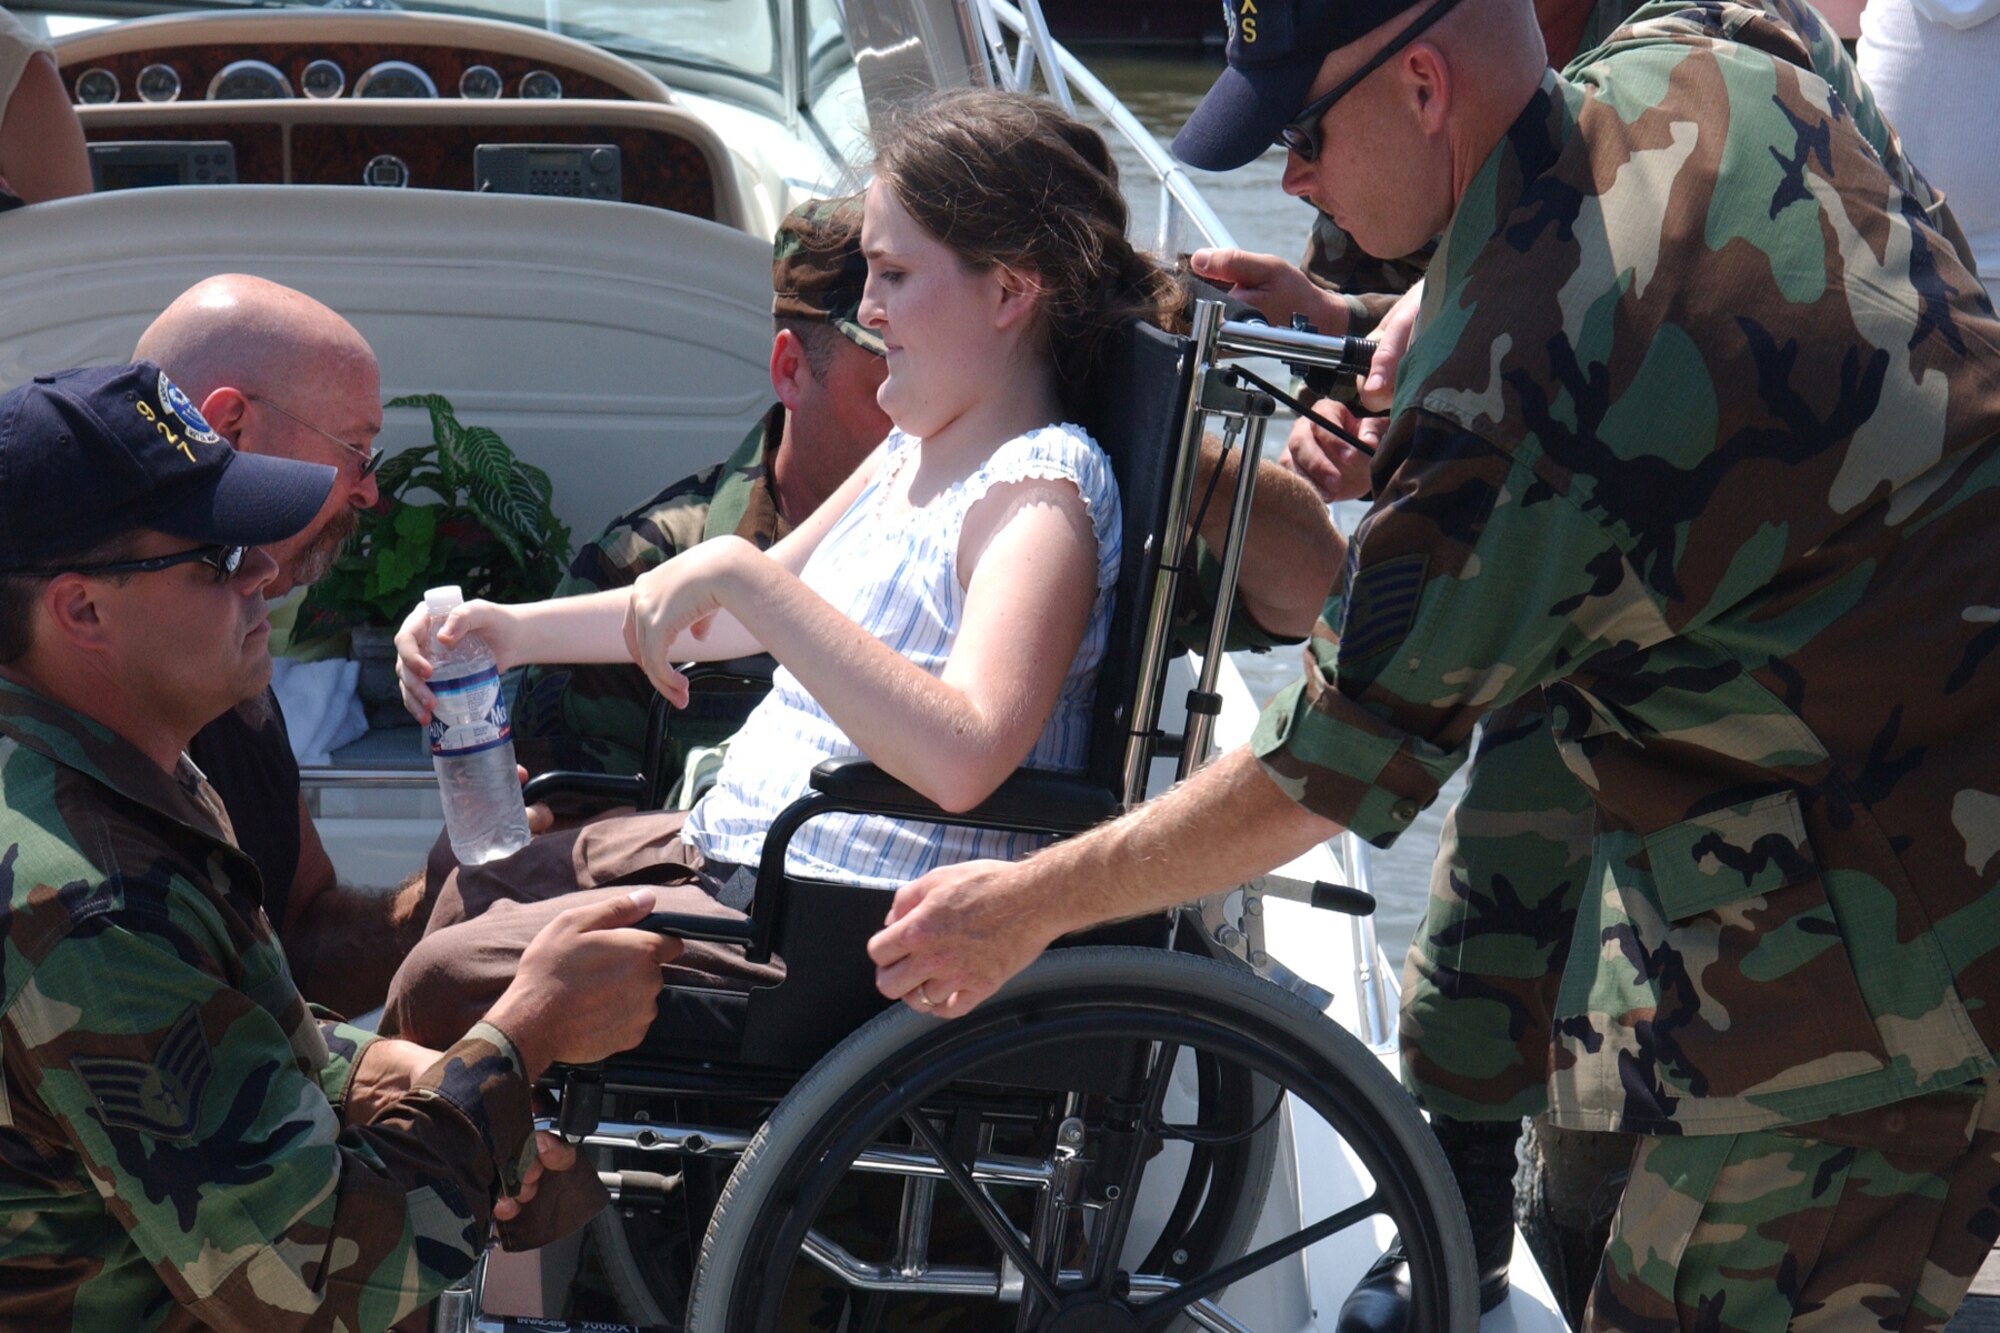 Airmen from the 927th Air Refueling Wing (Air Force Reserve) at Selfridge Air National Guard Base, Mich., assist a muscular dystrophy patient onto a boat shortly before getting underway for the annual boat outing hosted by the Huron Pointe Yacht Club. Wing members have volunteered their services for the past 23 years.